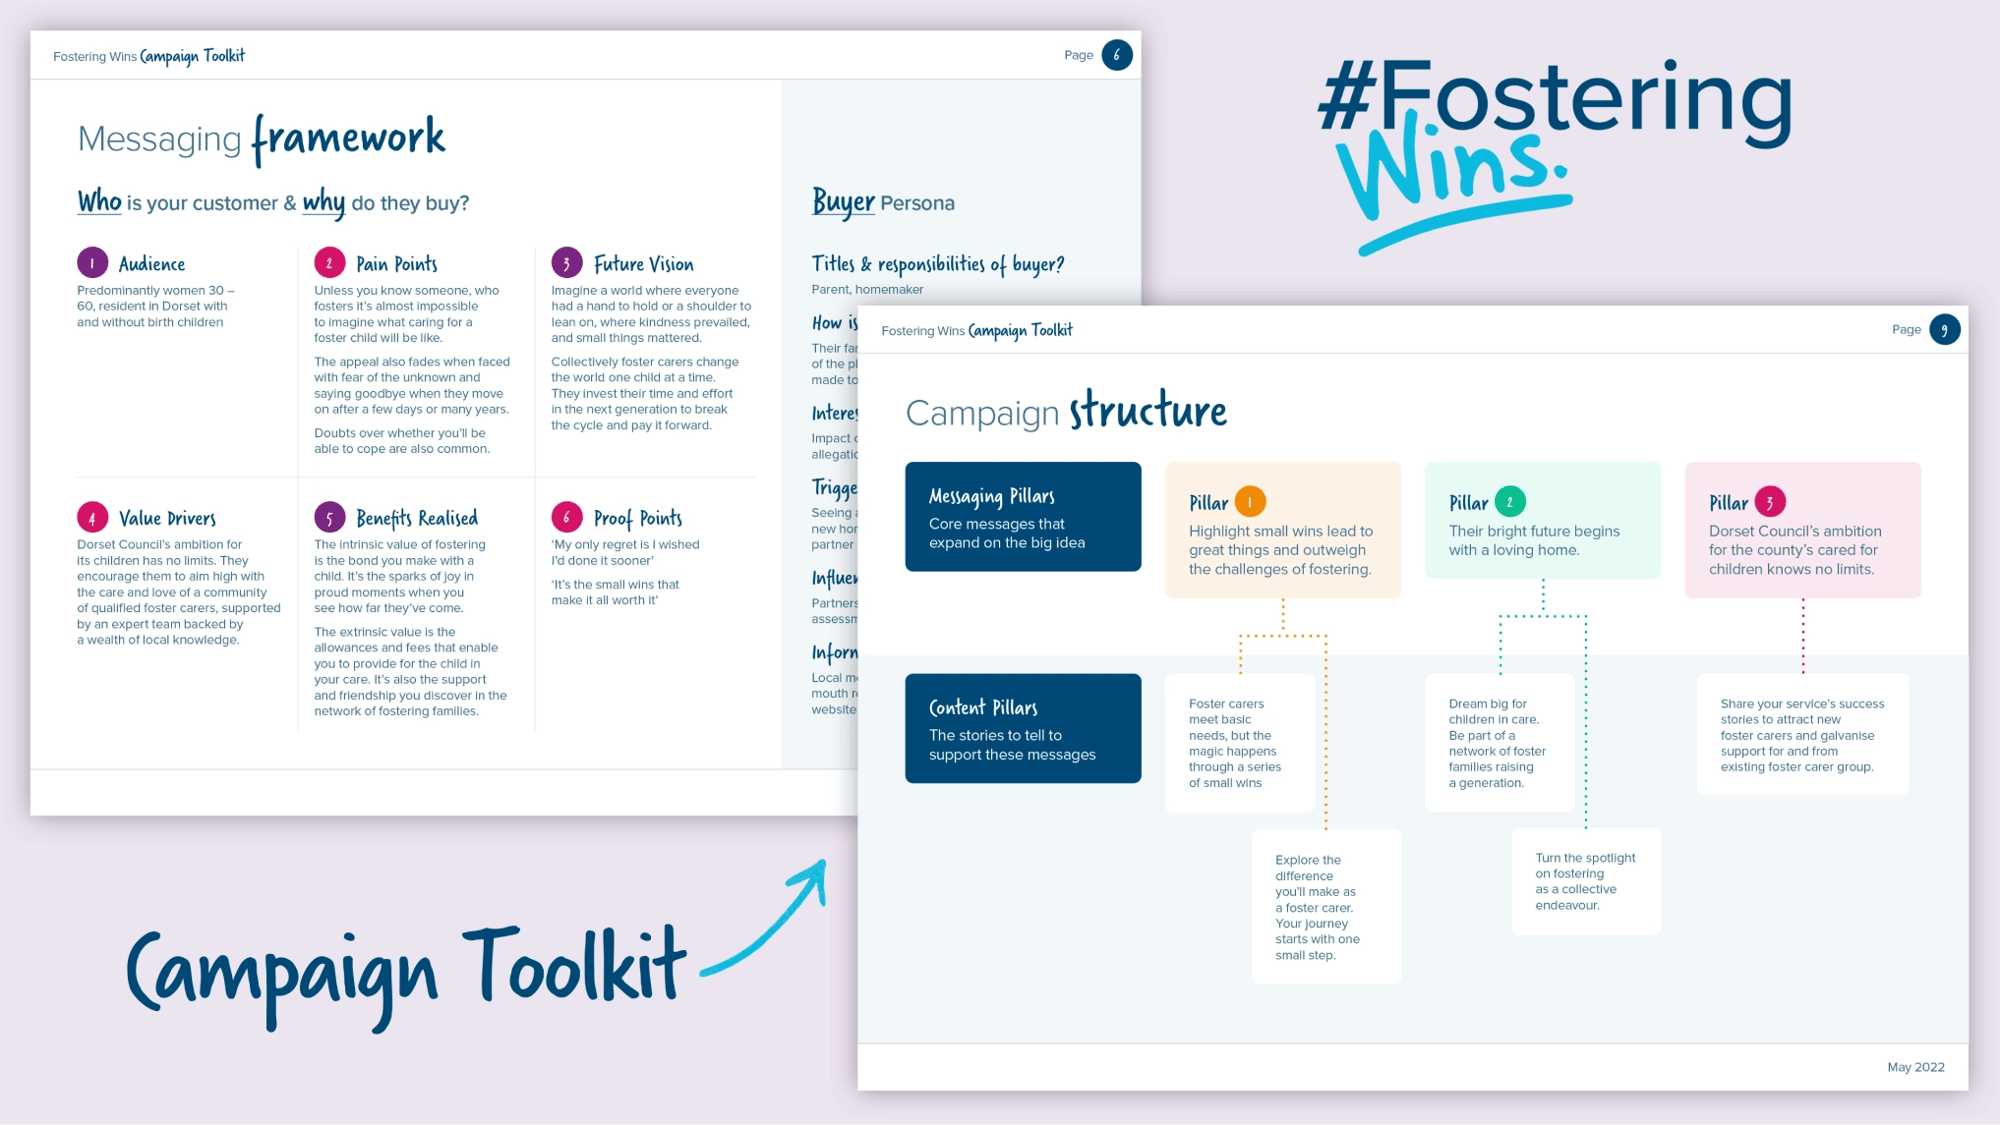 Mock ups of the messaging framework and campaign toolkit.